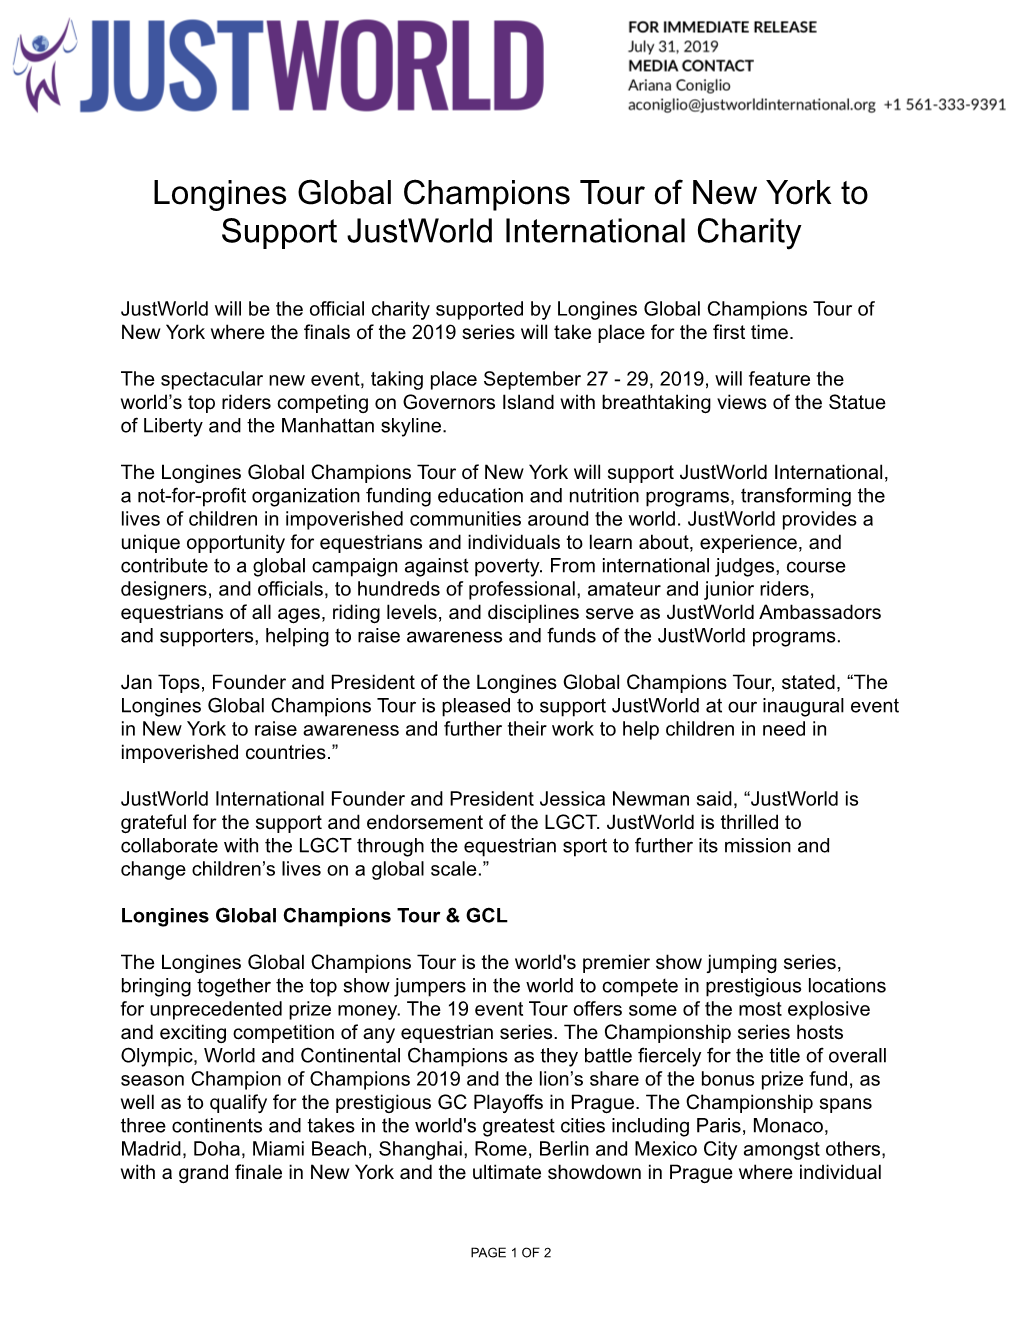 Longines Global Champions Tour of New York to Support Justworld International Charity